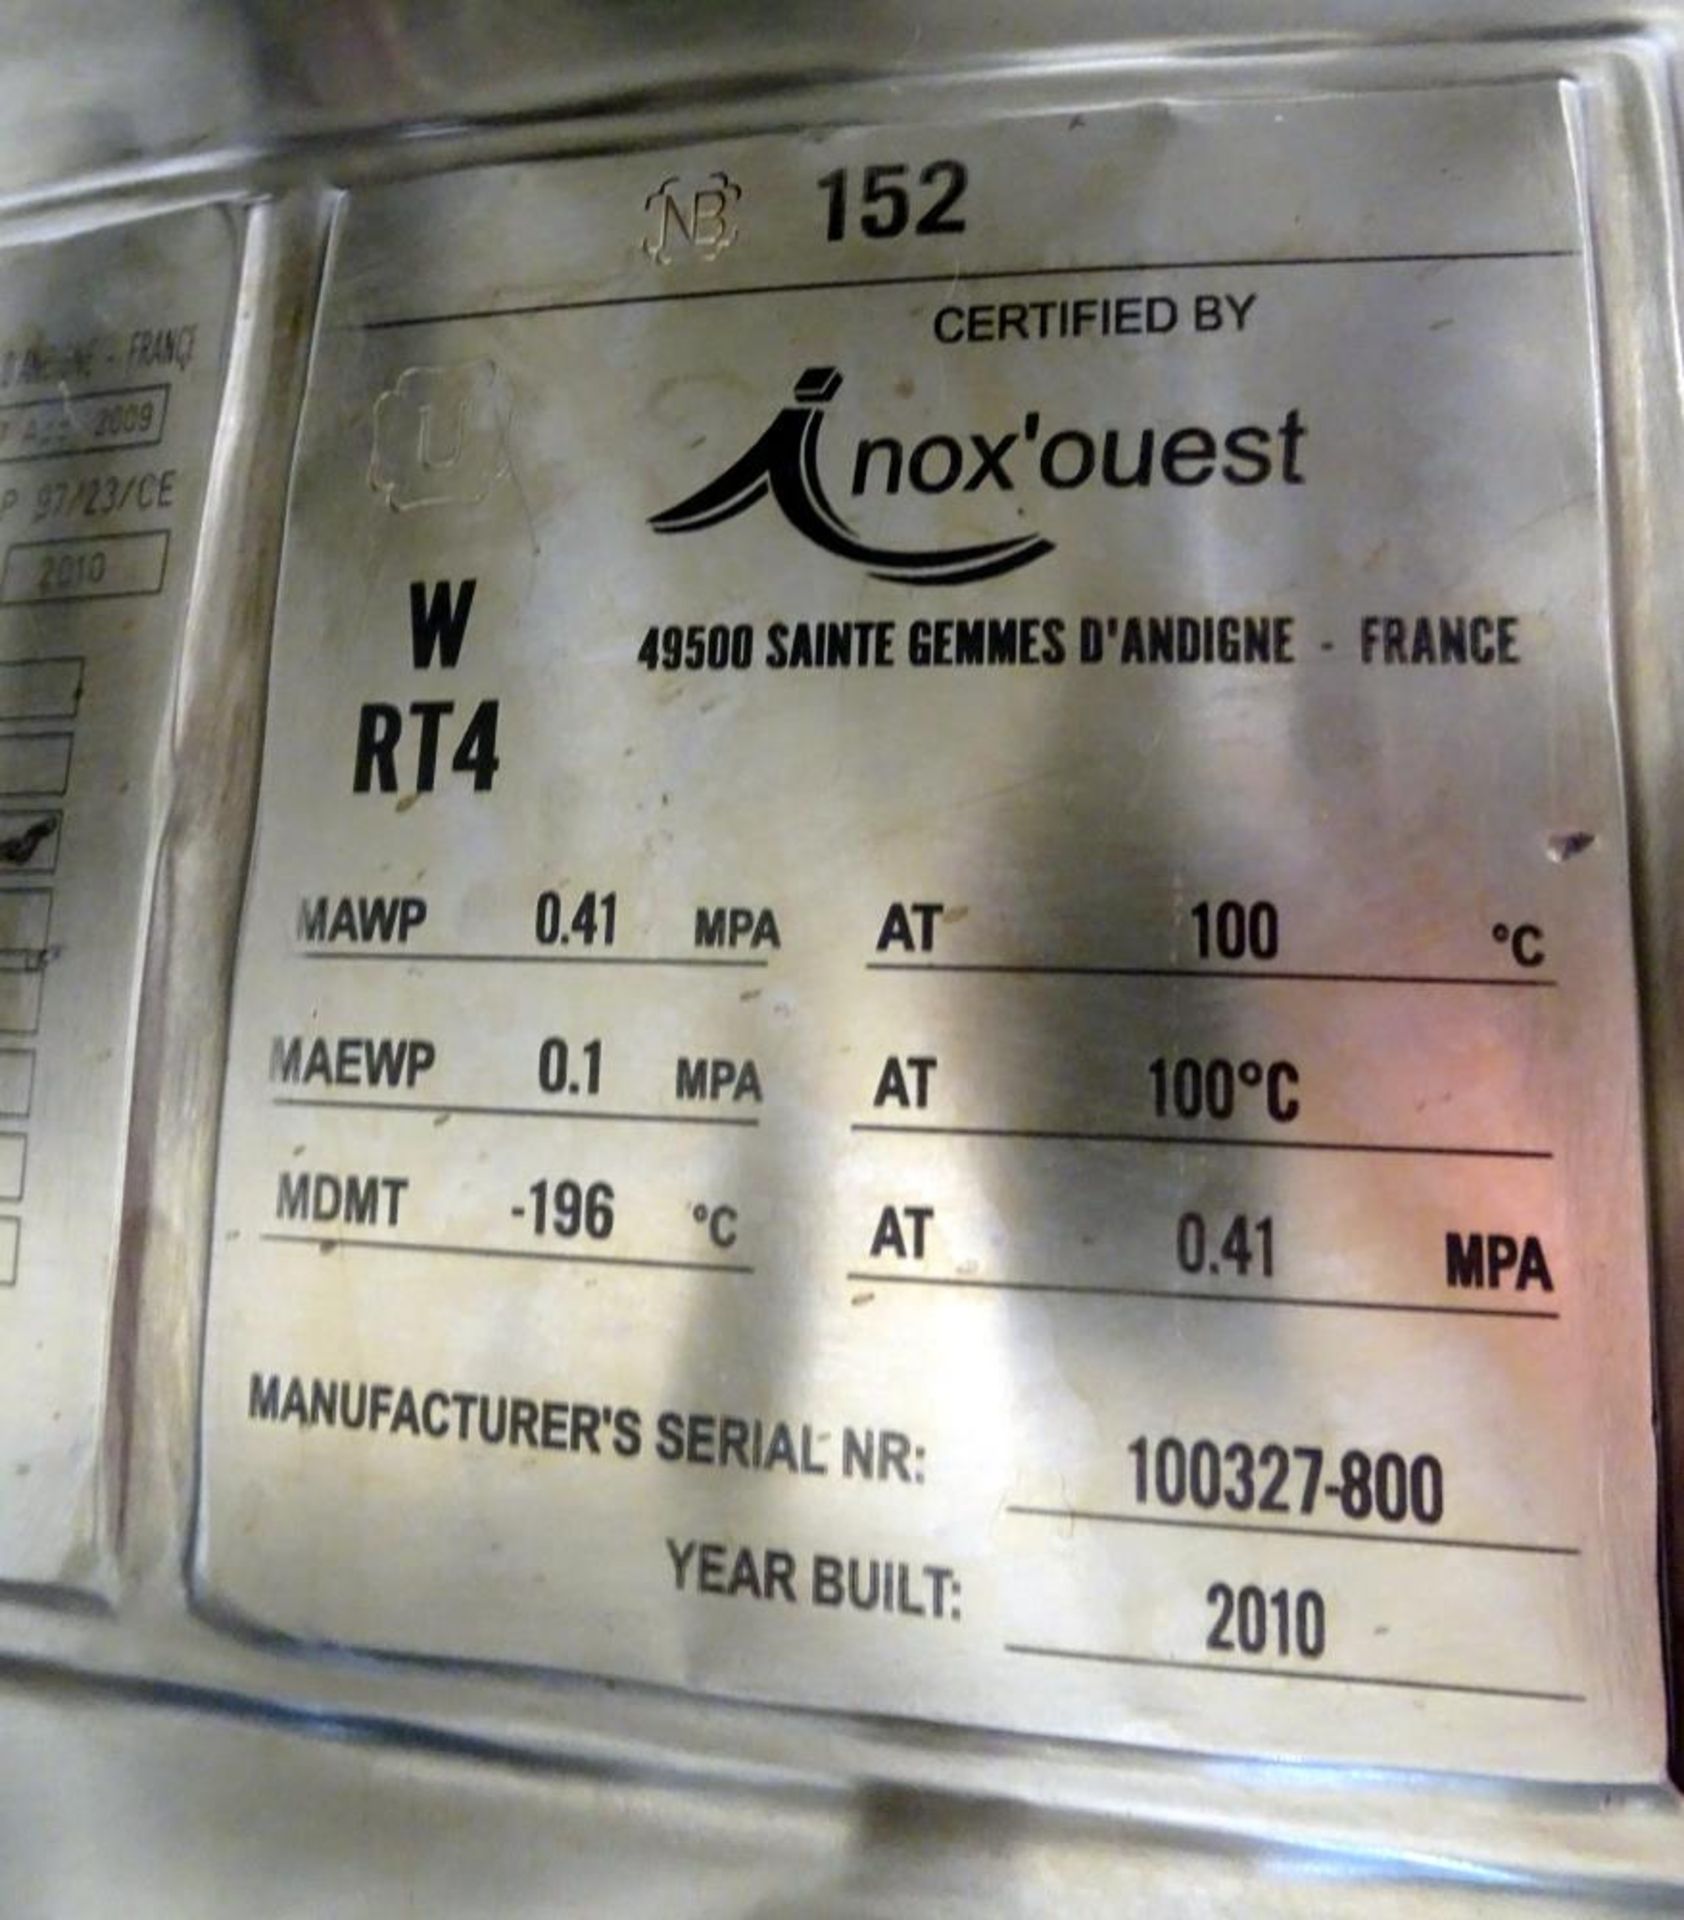 Inox'ouest Pressure Mix Tank - Image 8 of 9